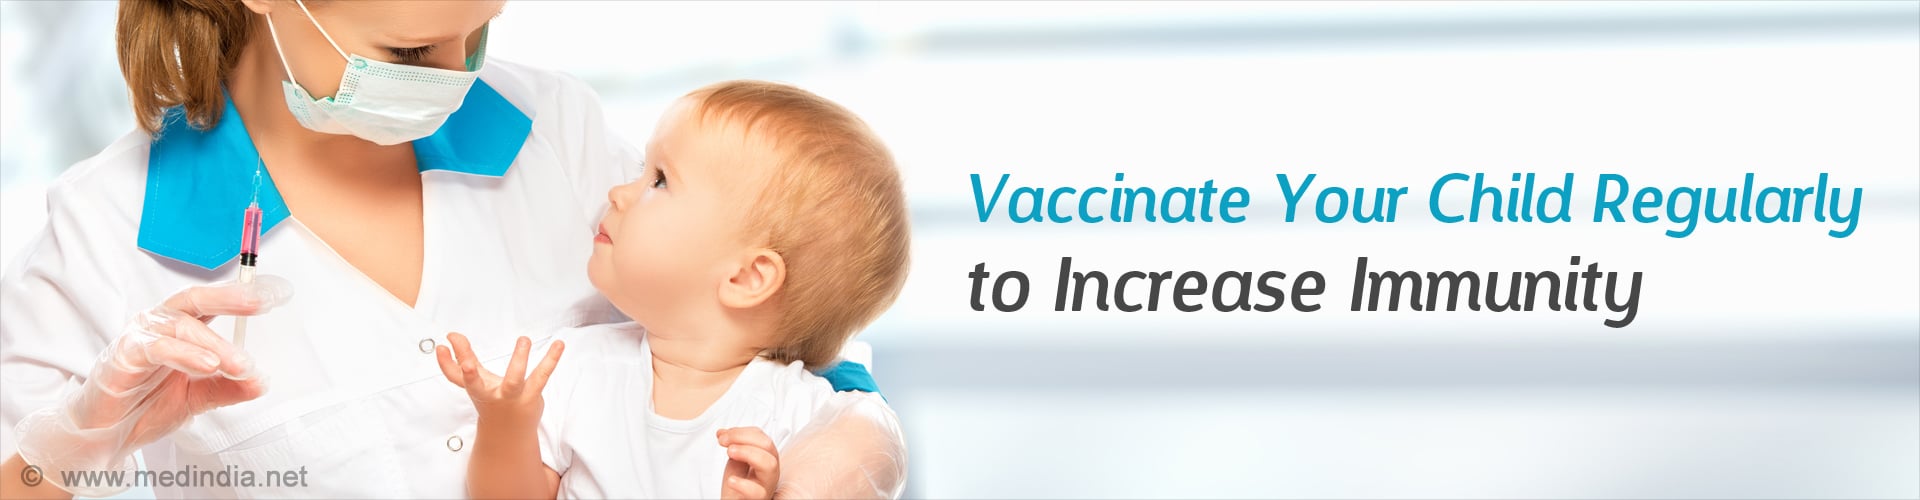 Get Your Children Vaccinated Regularly to Increase their Immunity